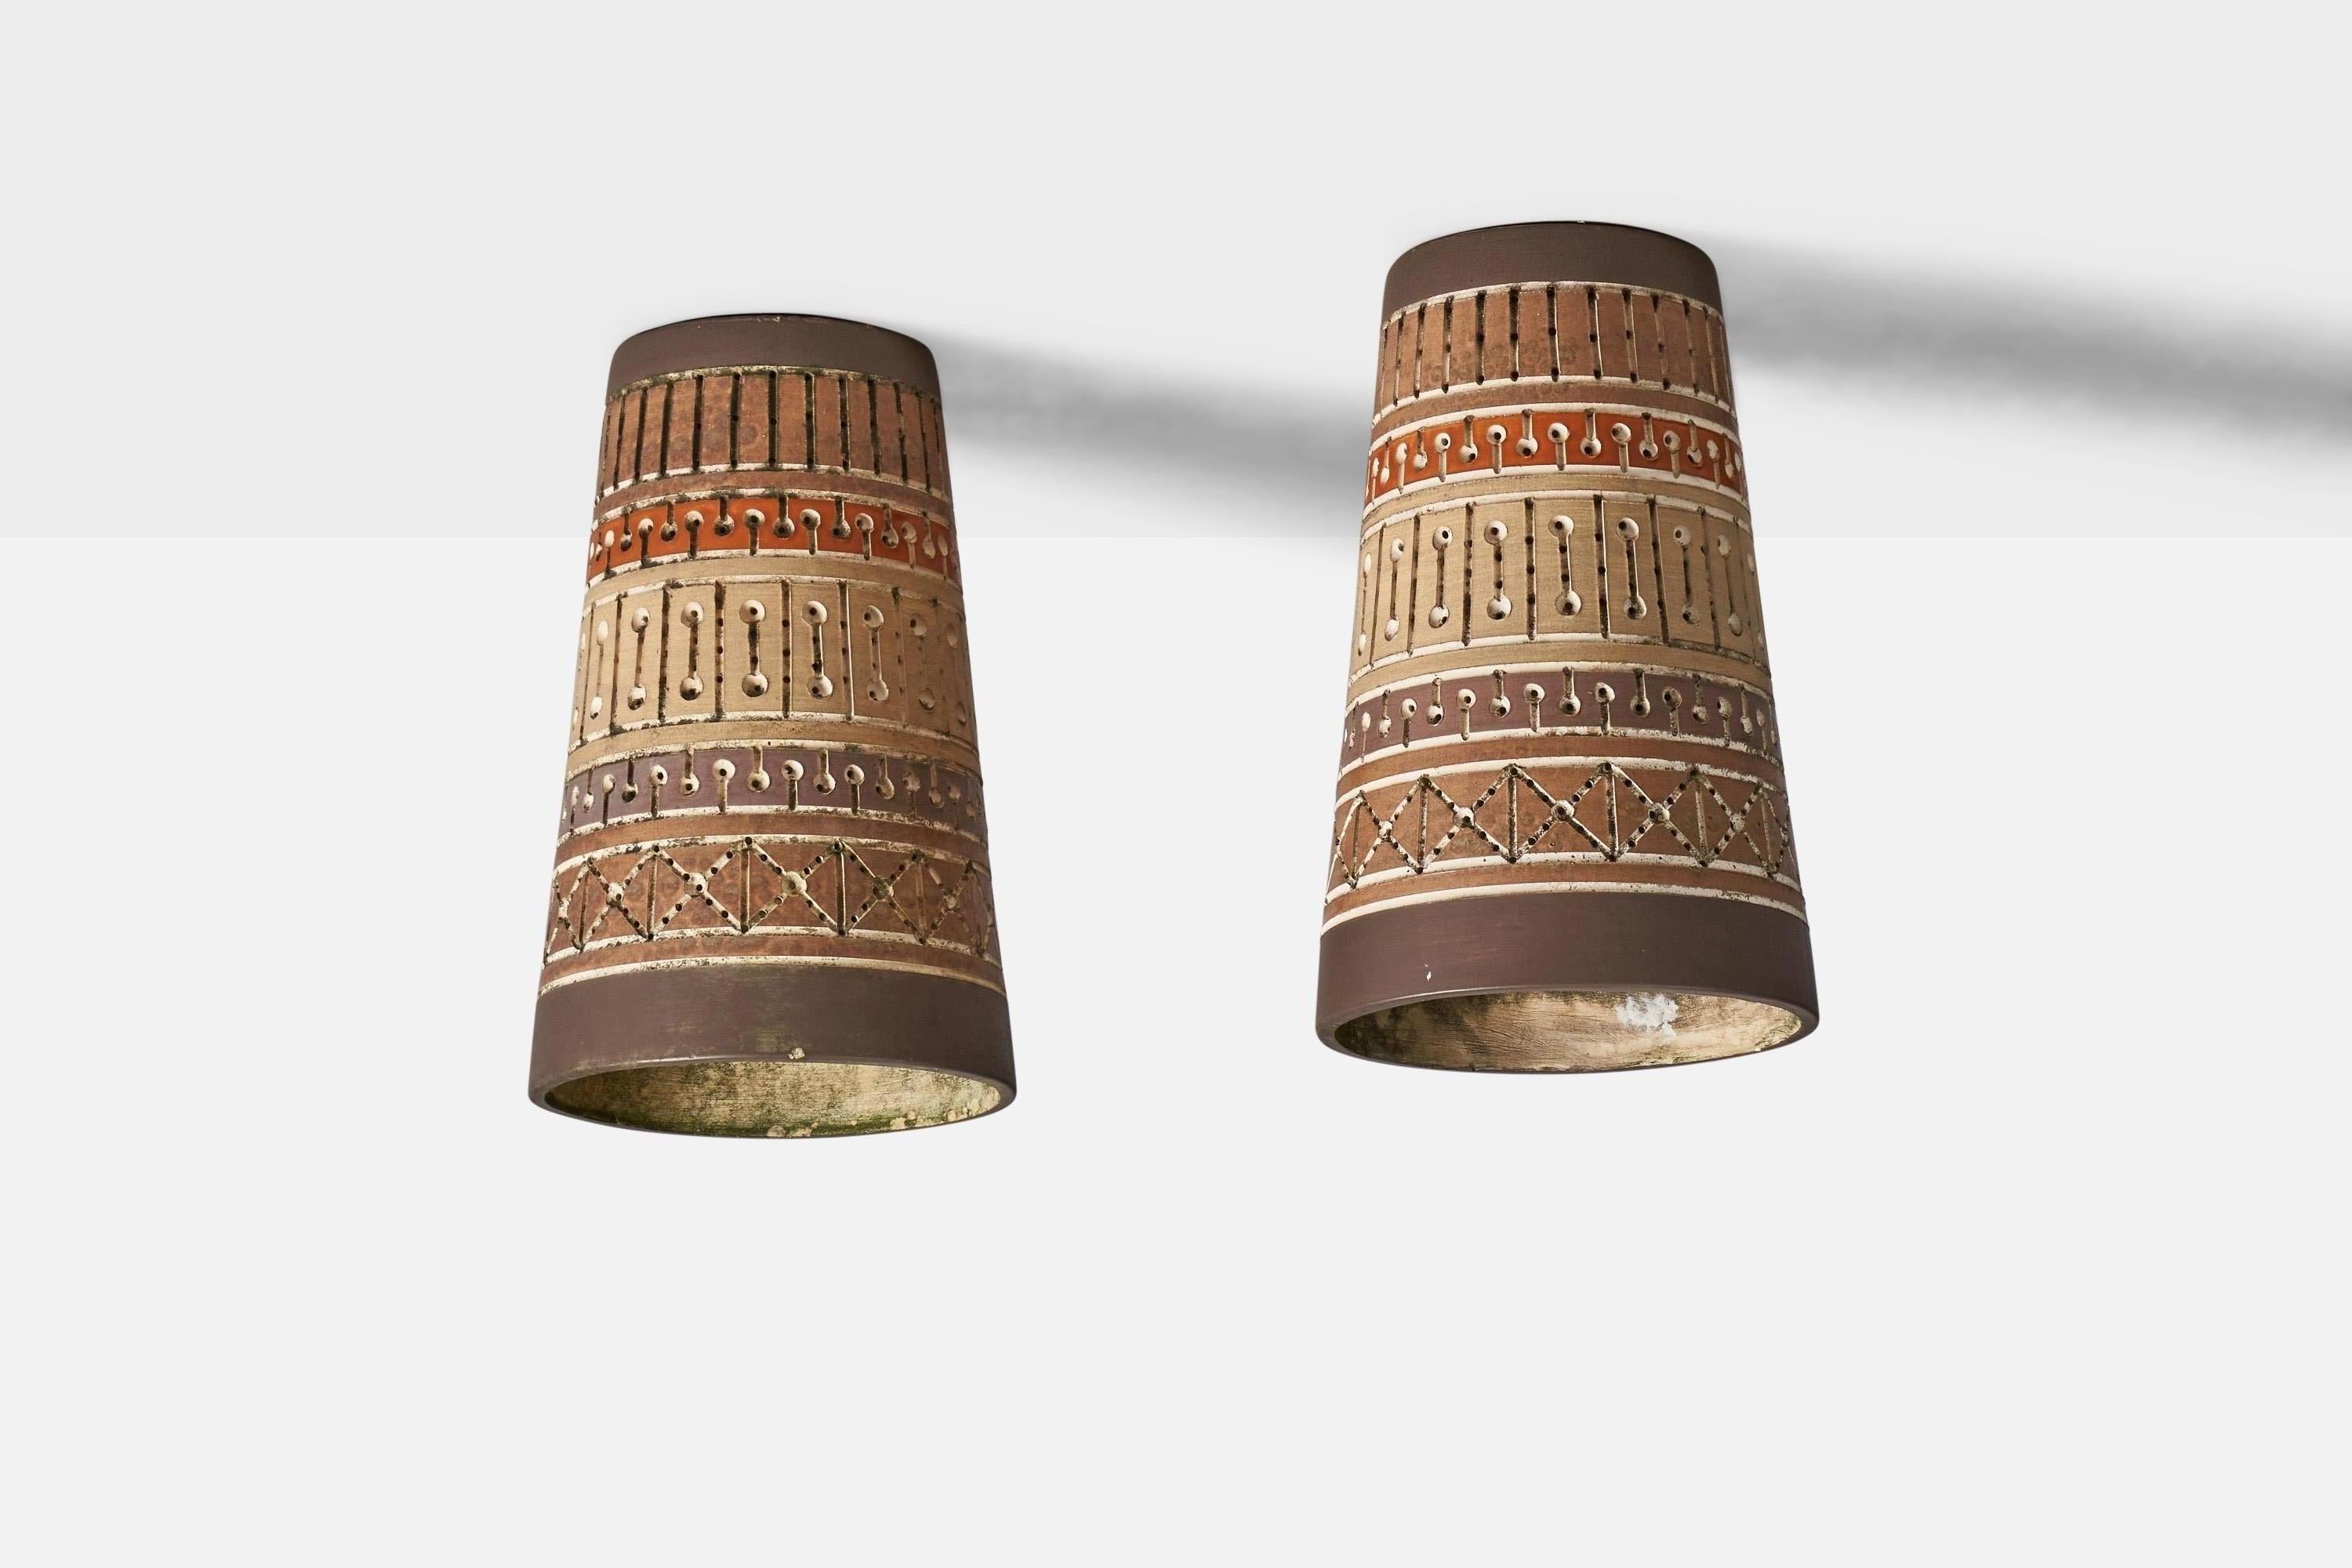 A pair of ceramic beige, brown, and orange-painted flush mounts, designed and produced by Martha and Beaumont Mood, San Antonio, Texas, USA, 1970s.

Overall Dimensions (inches): 15